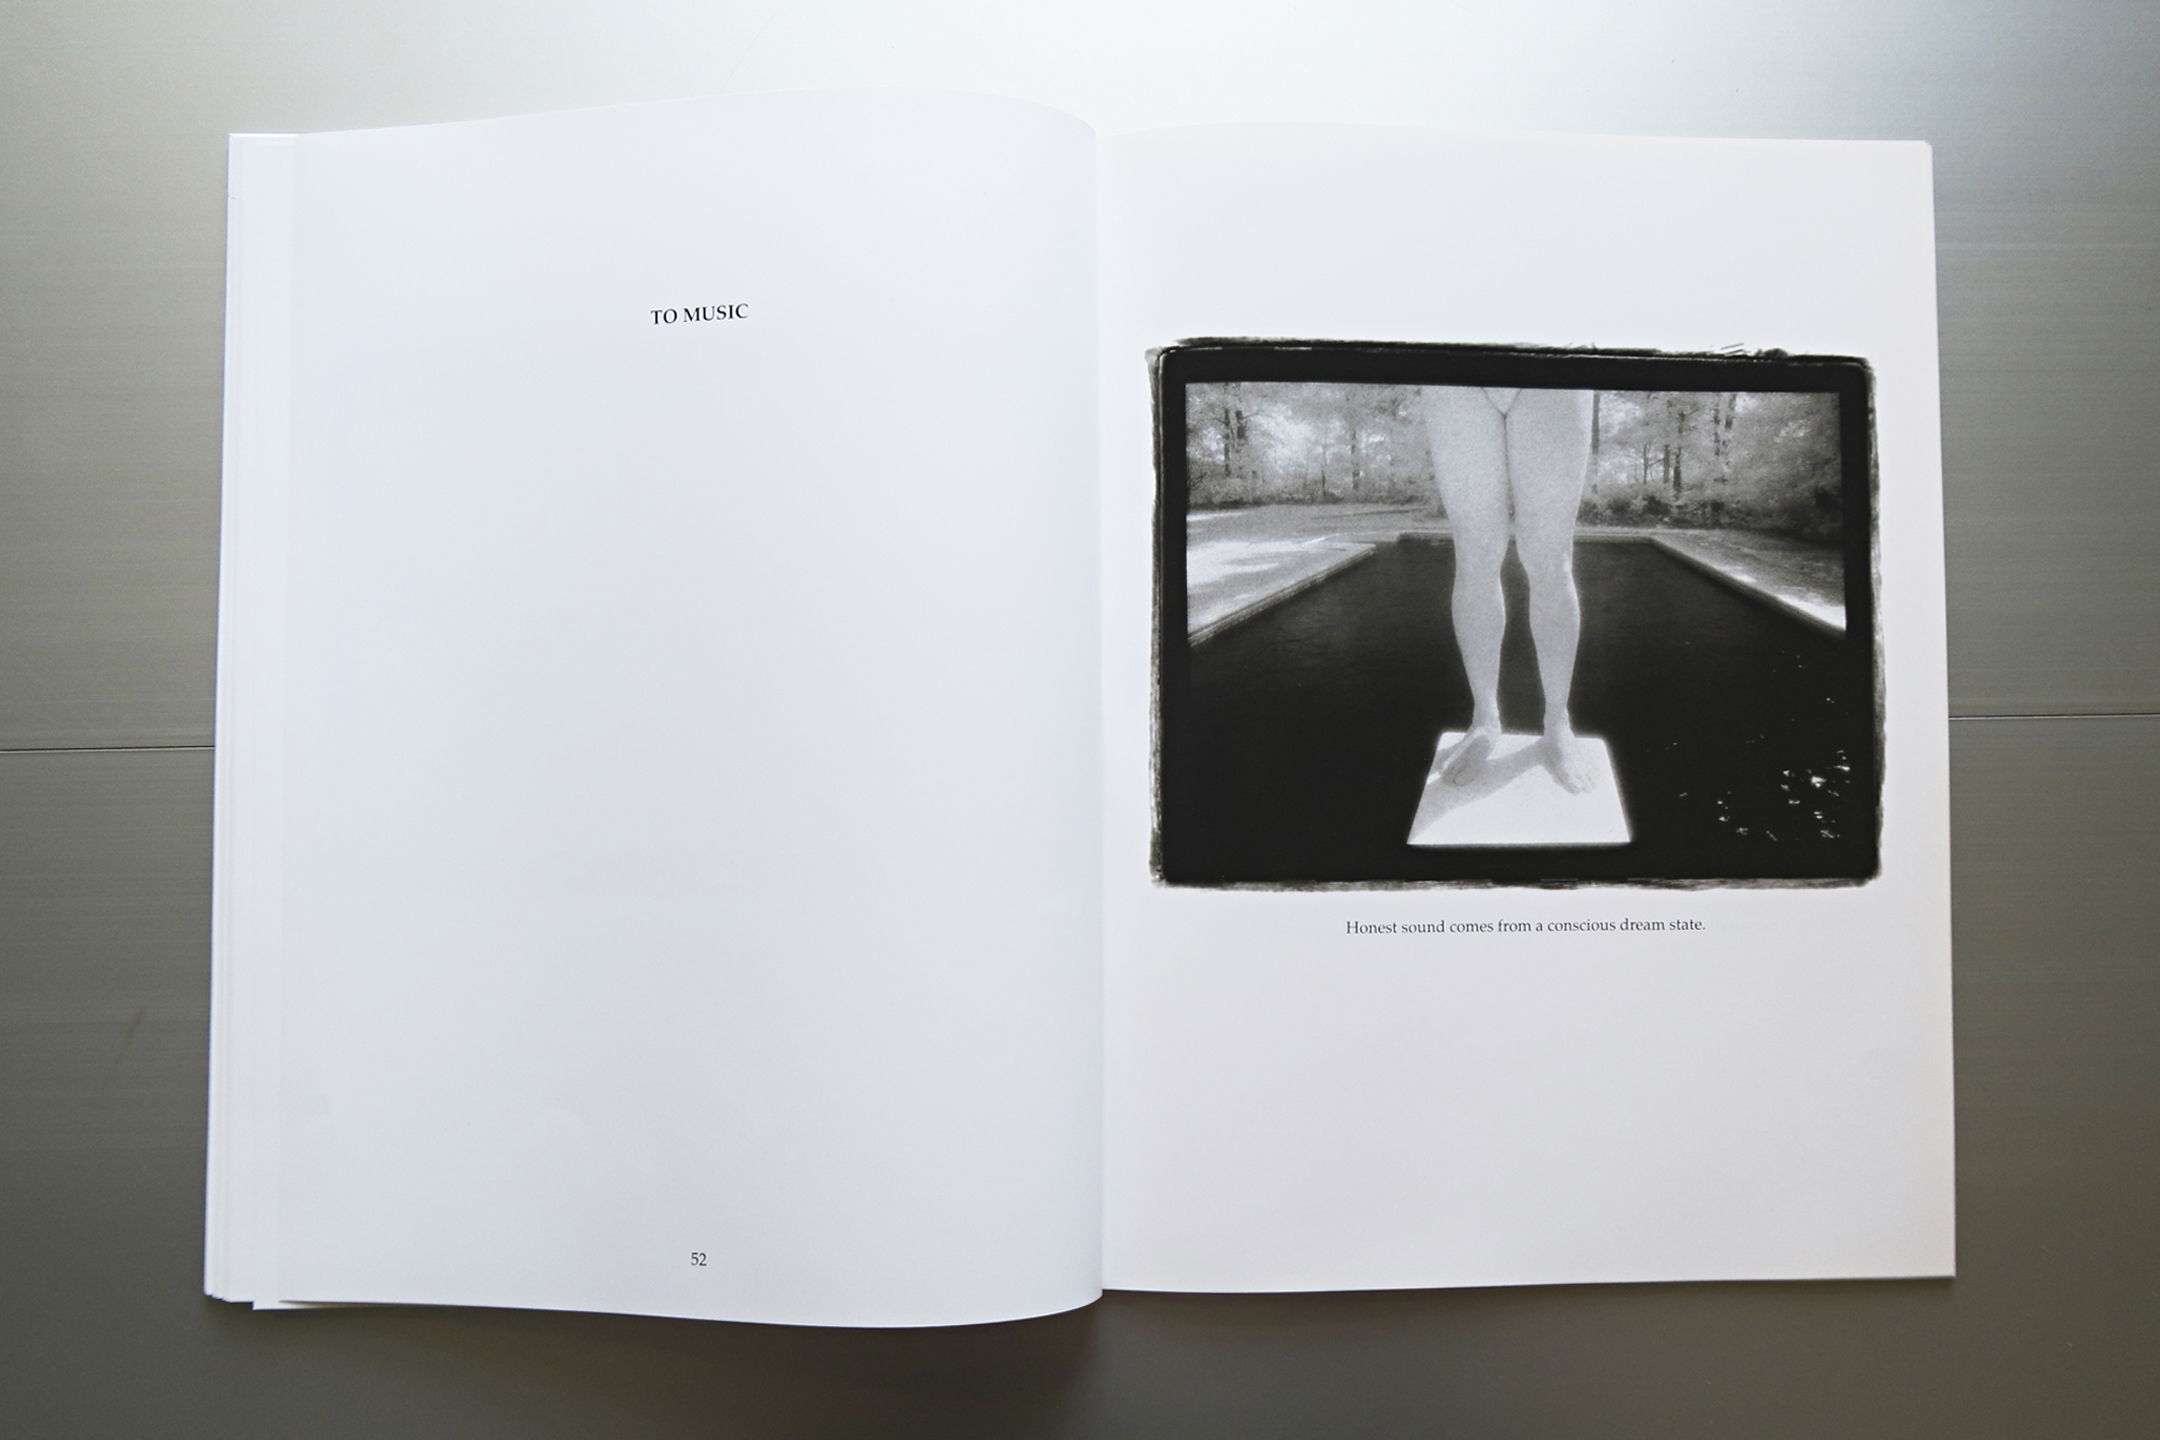  Photography and text by Joanne Dugan  Softcover book published by Ed. q, Berlin, Germany 